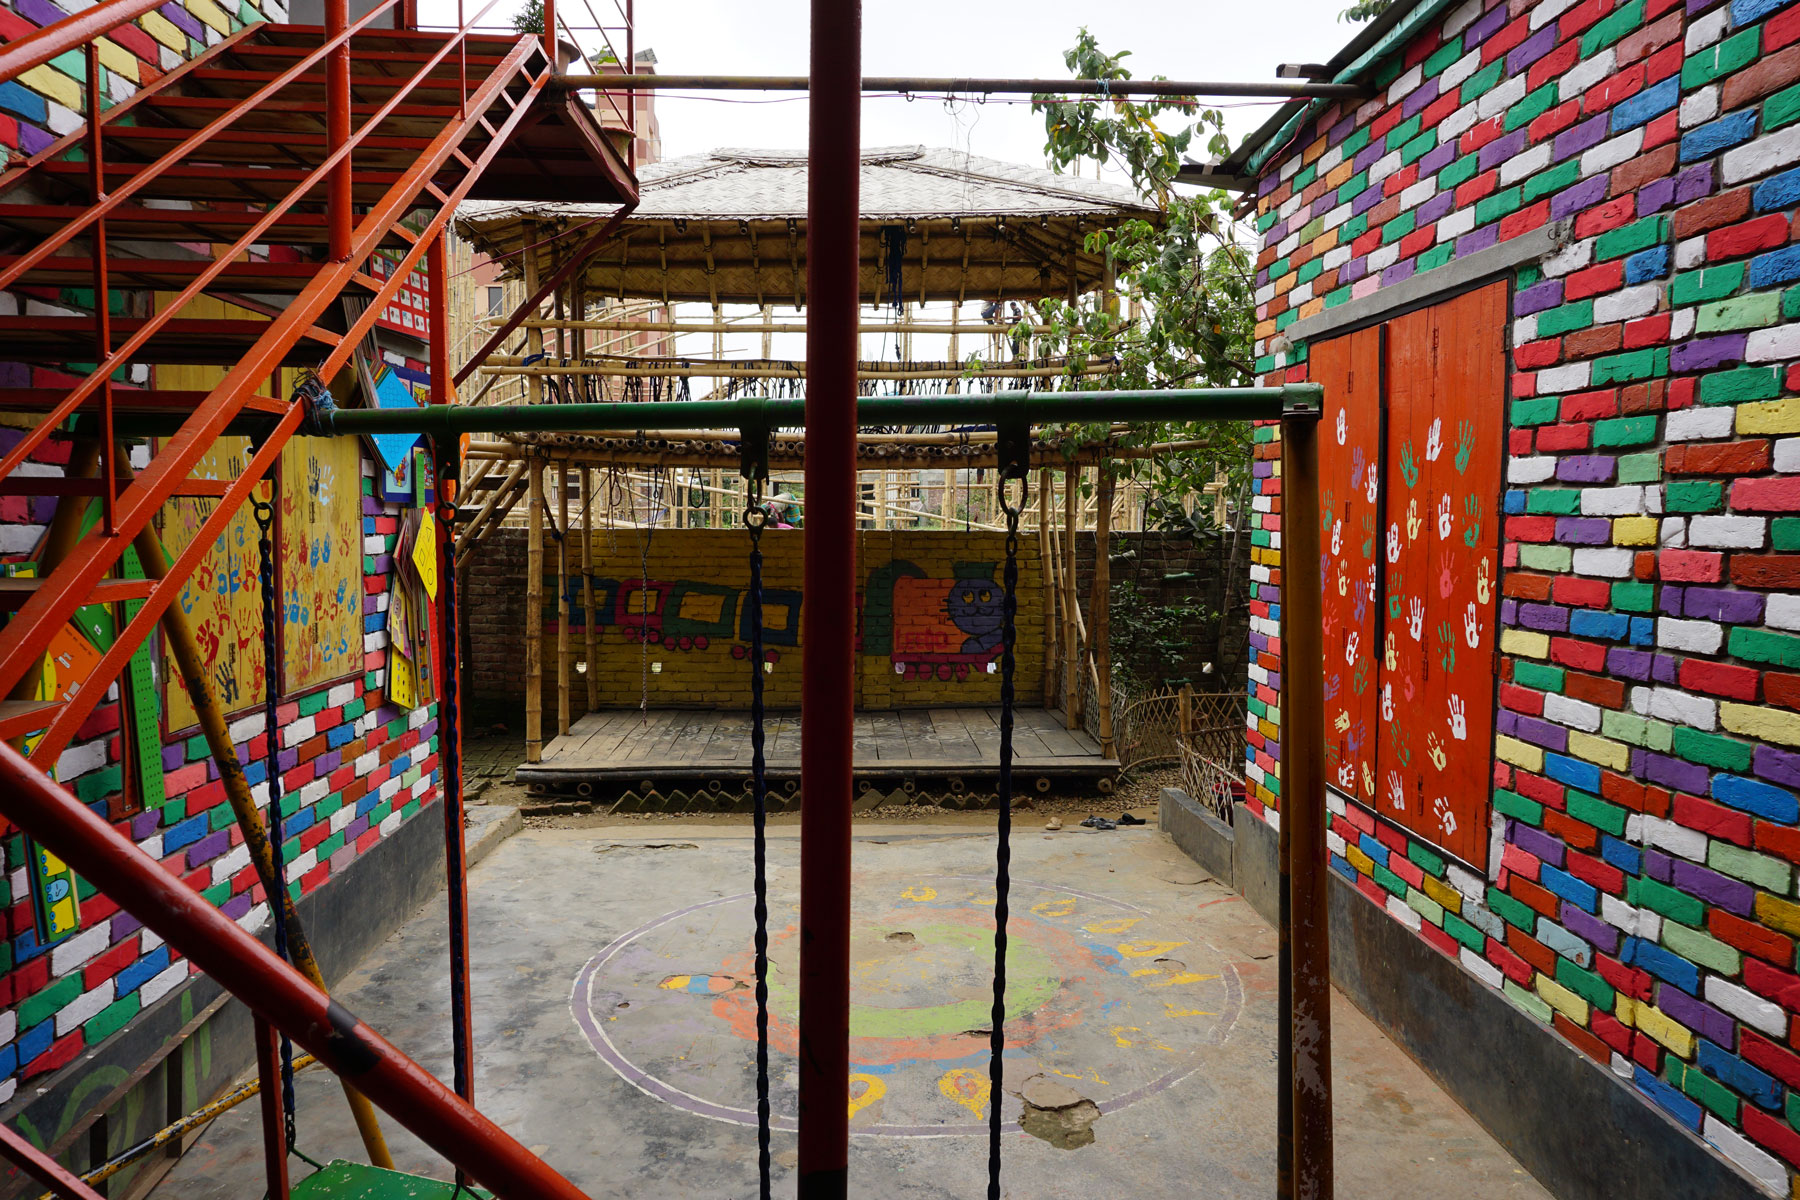 Colored tiles, a swing set, and red stairs line LEEDO's indoor patio. © Global Fund for Children